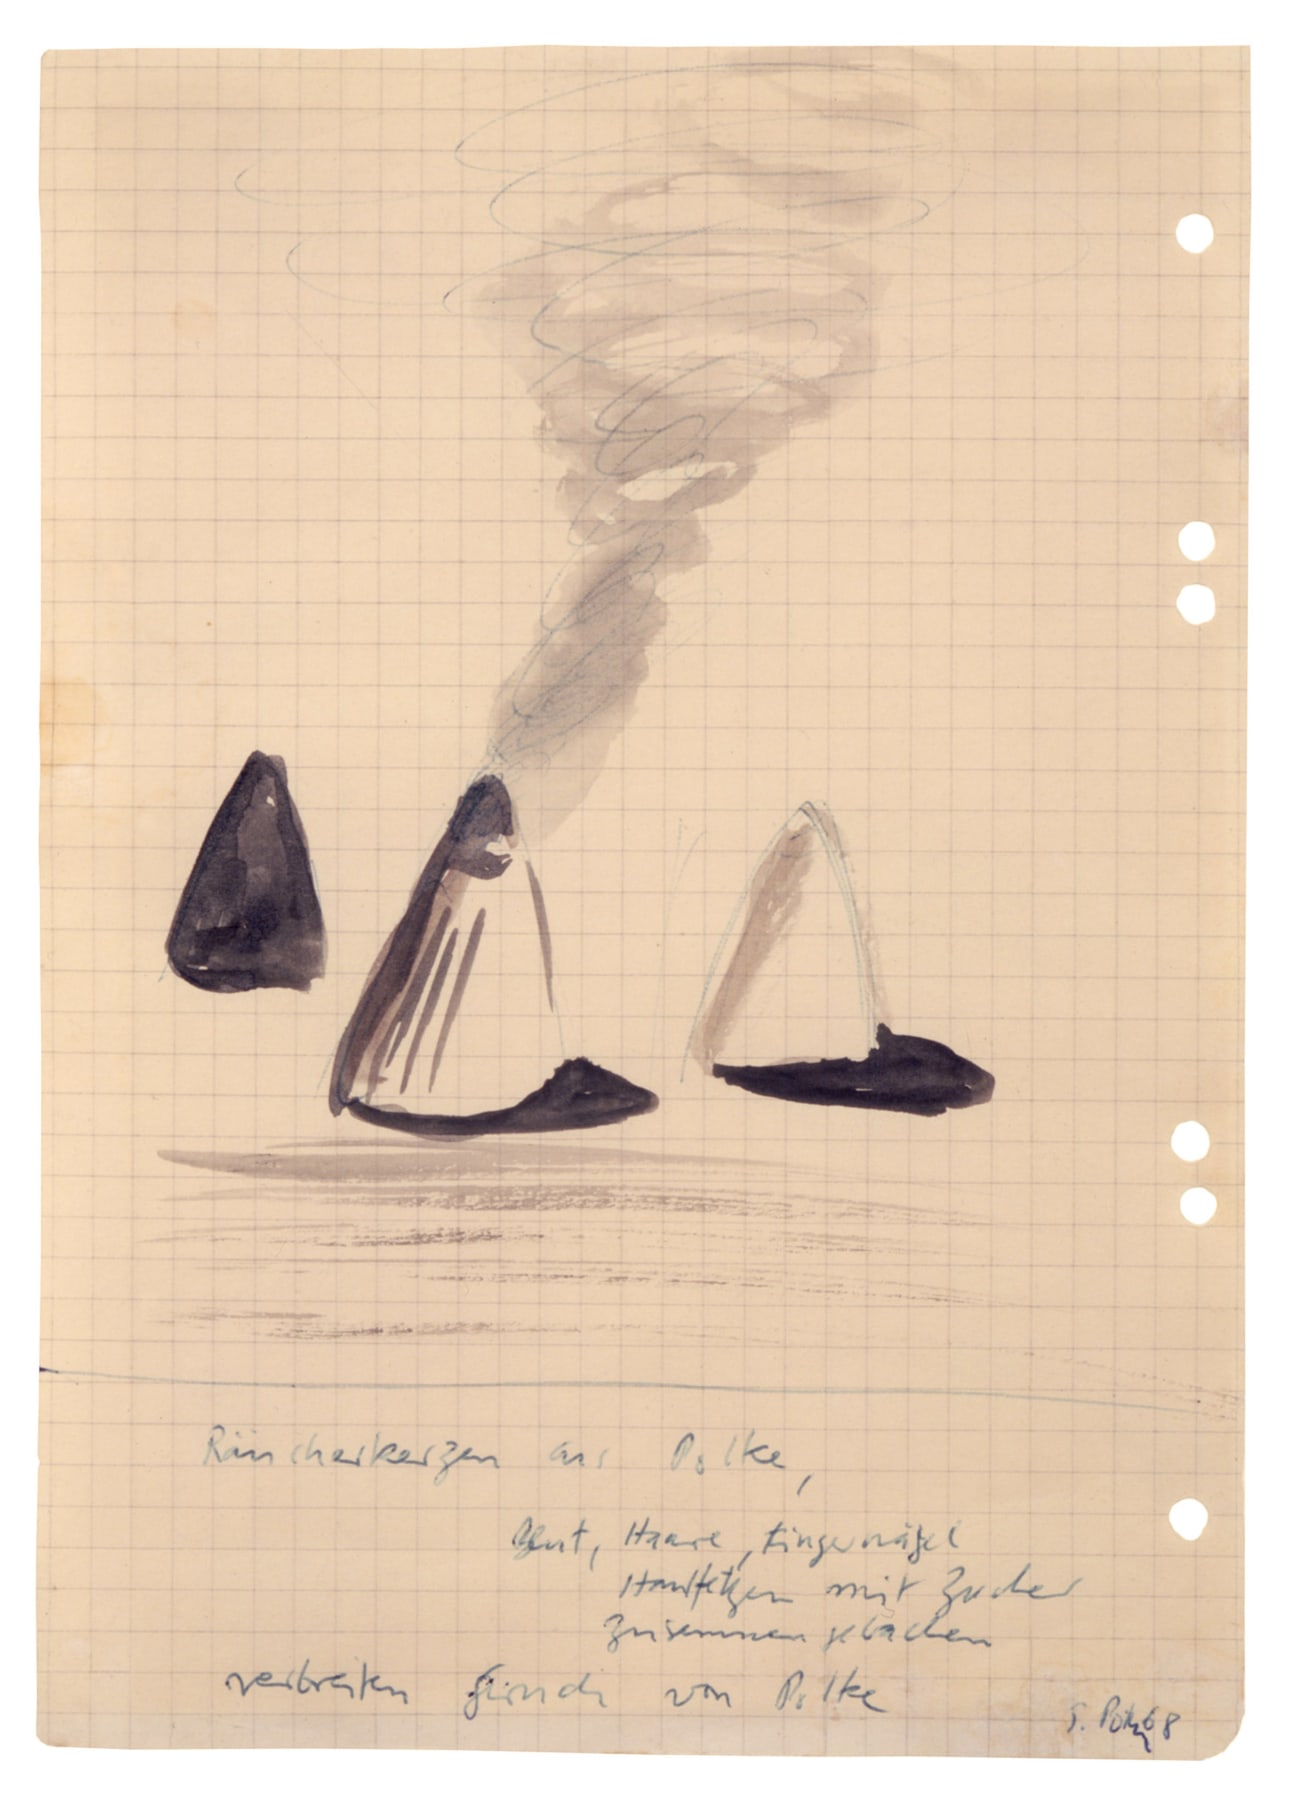 &quot;Incense made from Polke: blood, hair, fingernails, calluses, baked with sugar. Spread smell of Polke&quot;, 1968